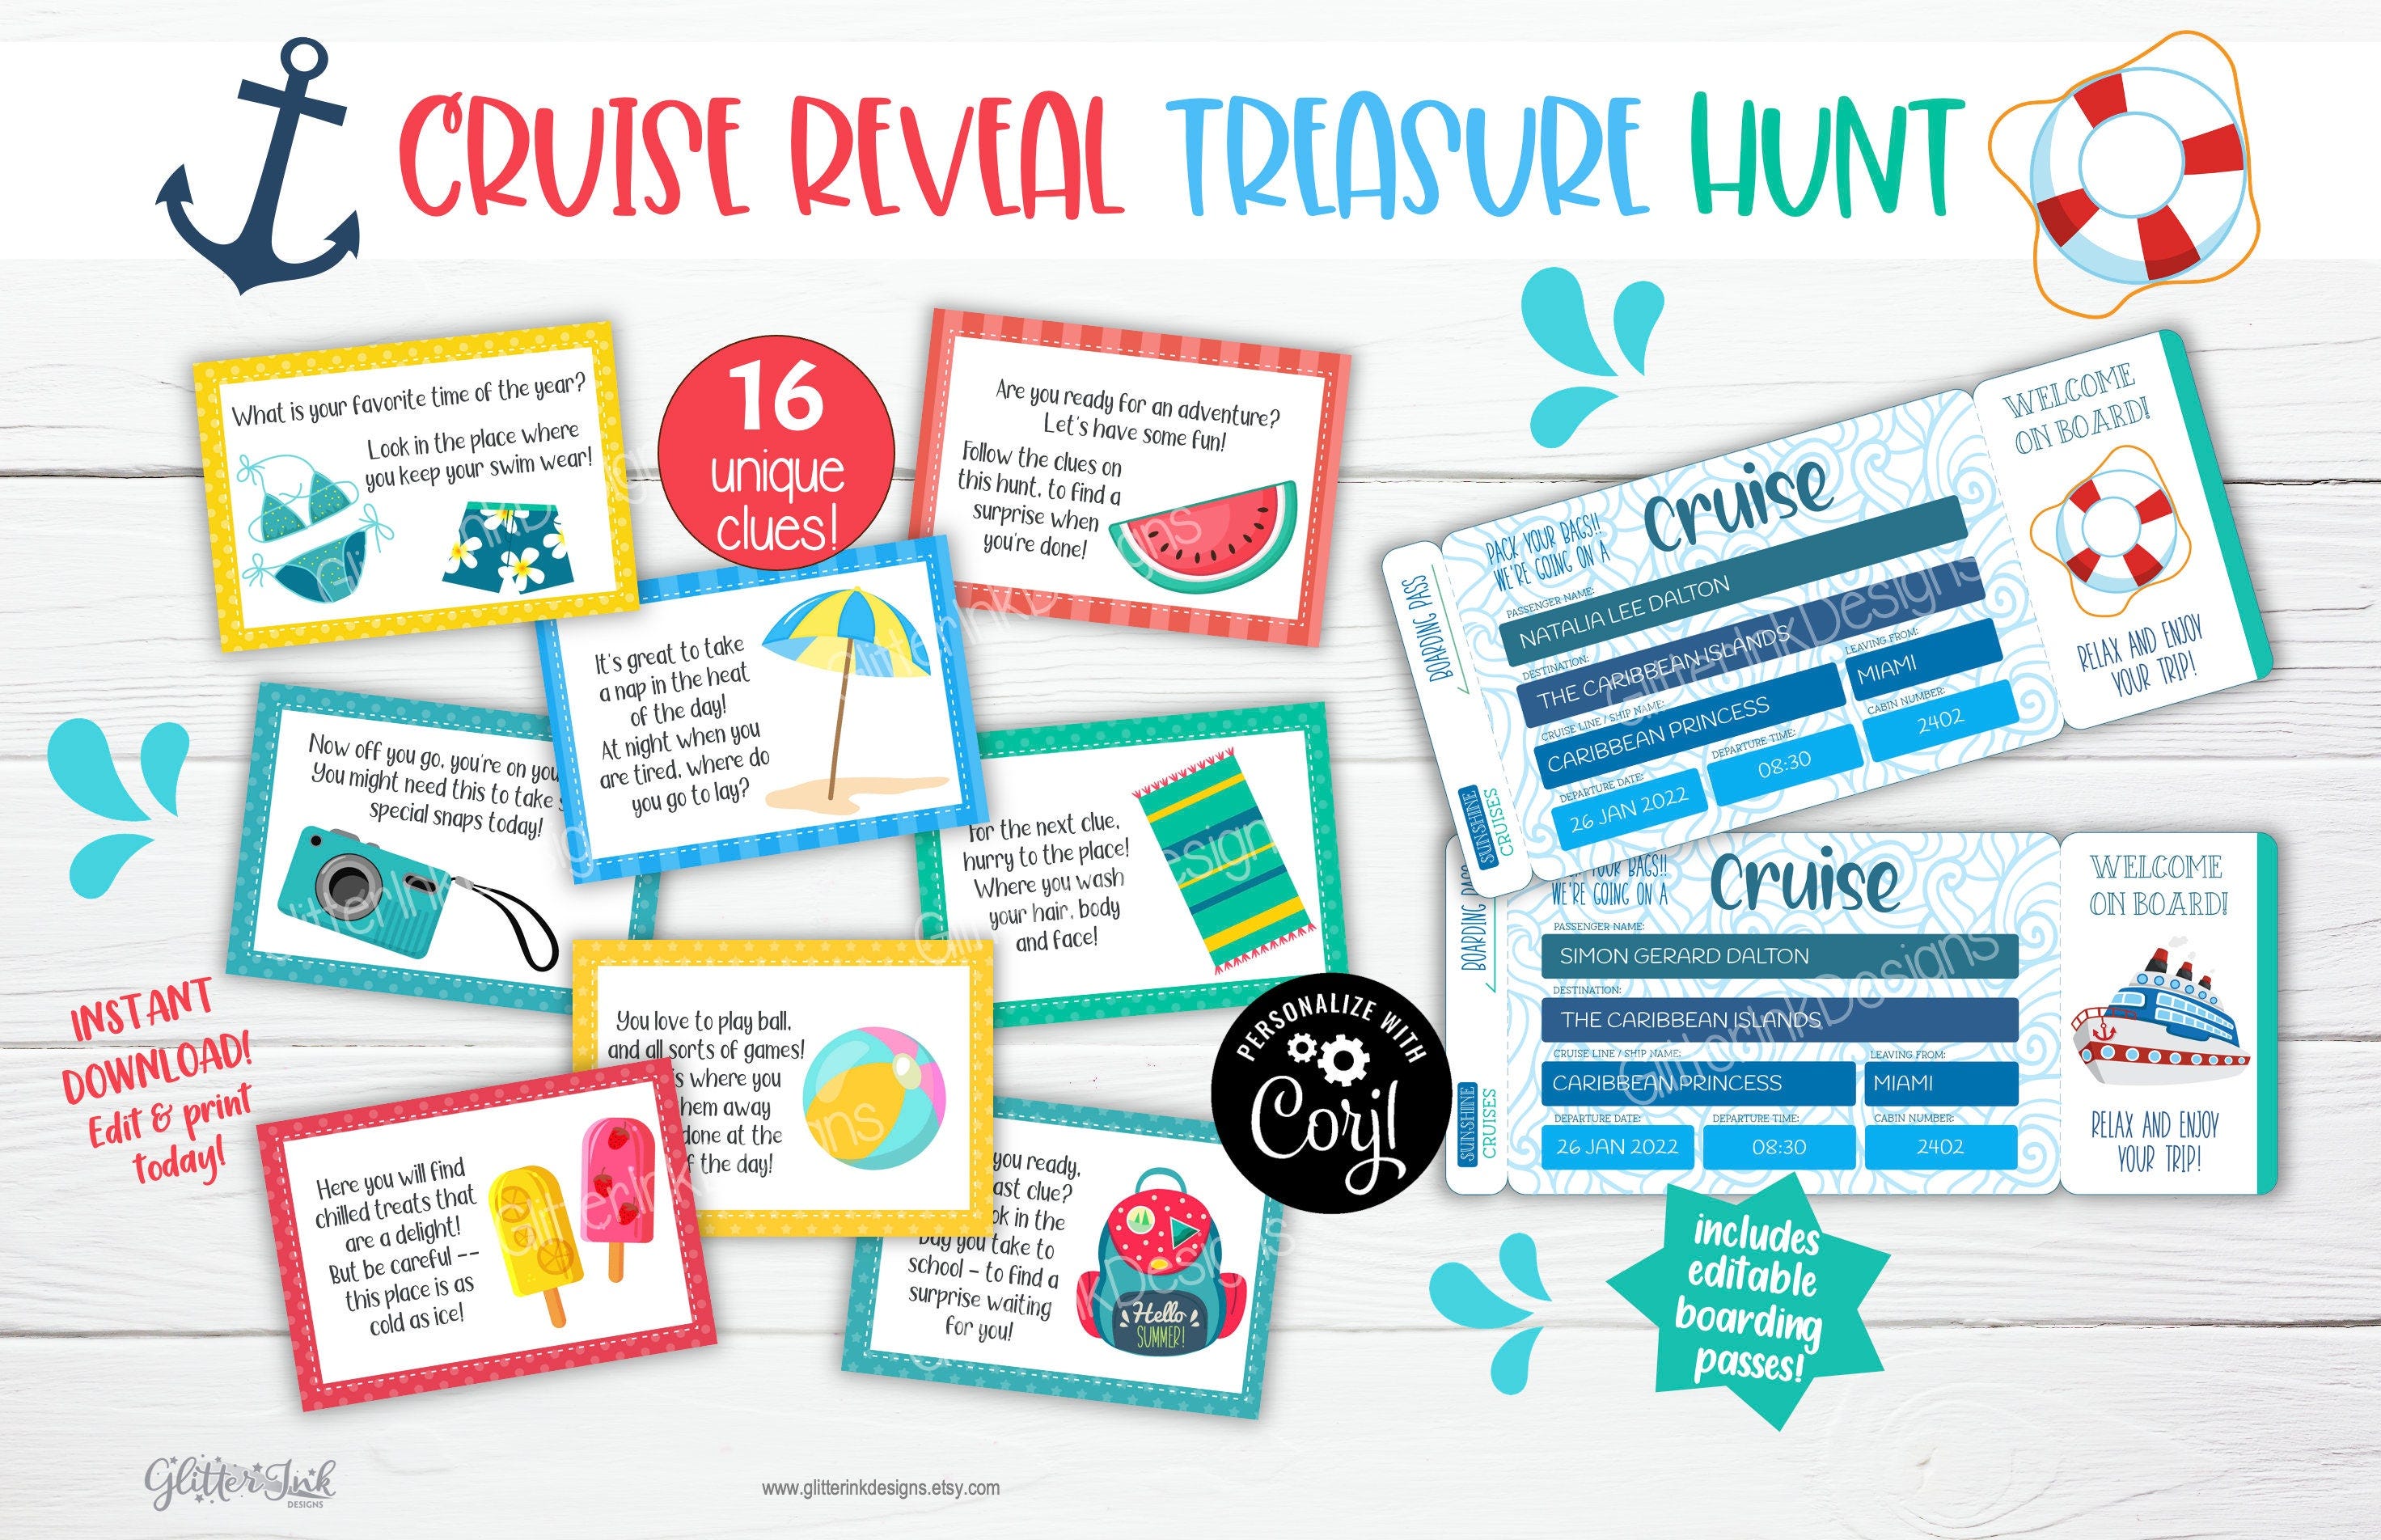 Surprise cruise trip reveal scavenger hunt & boarding pass / Printable family vacation kids treasure hunt clues / Christmas summer holiday